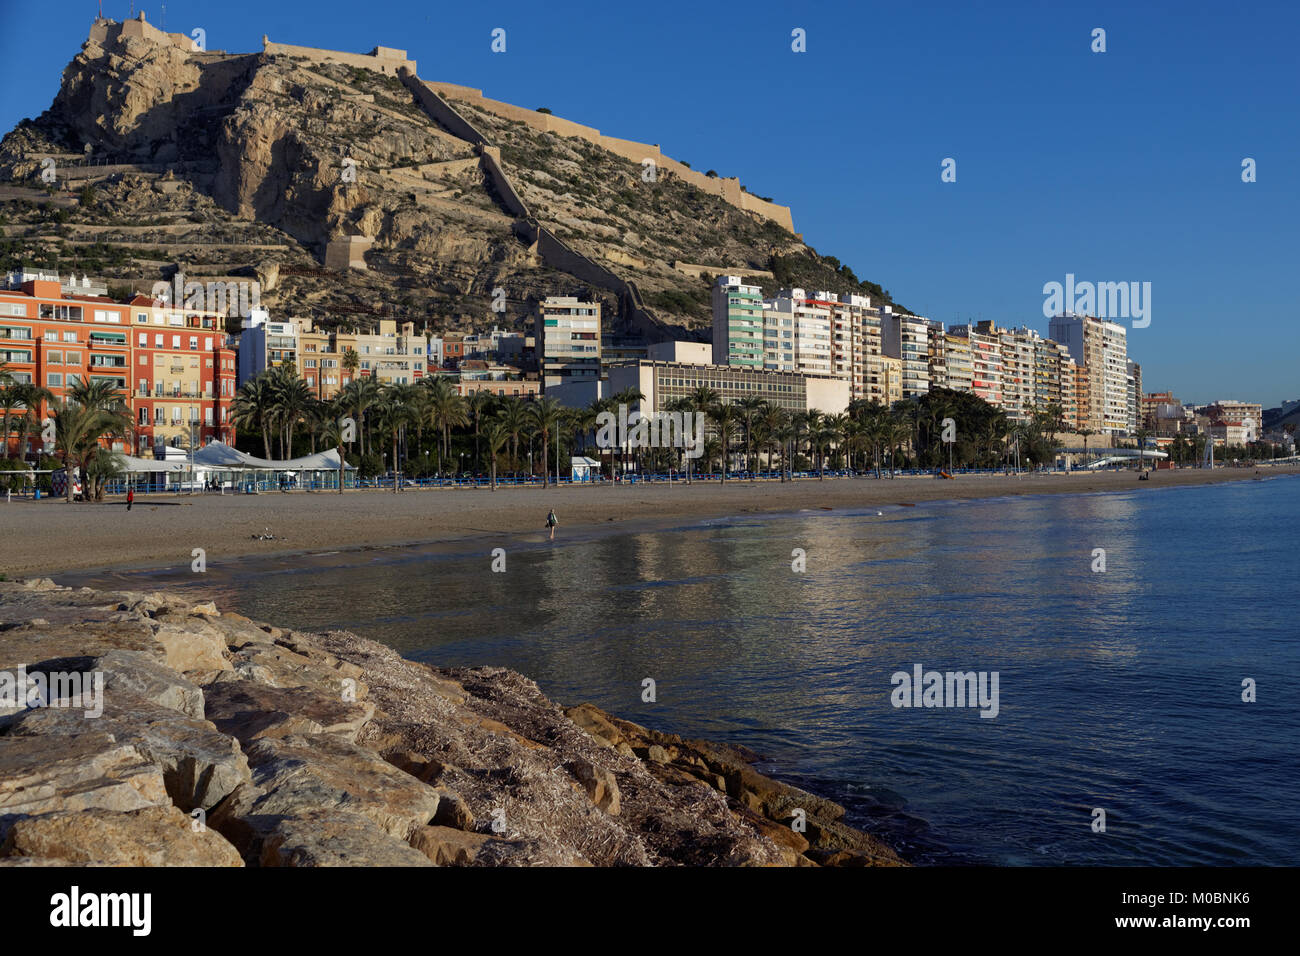 Alicante, Spain - January 08, 2013: View to Santa Barbara castle from the beach. Situated on the slopes of Mount Benacantil, the castle originated in  Stock Photo